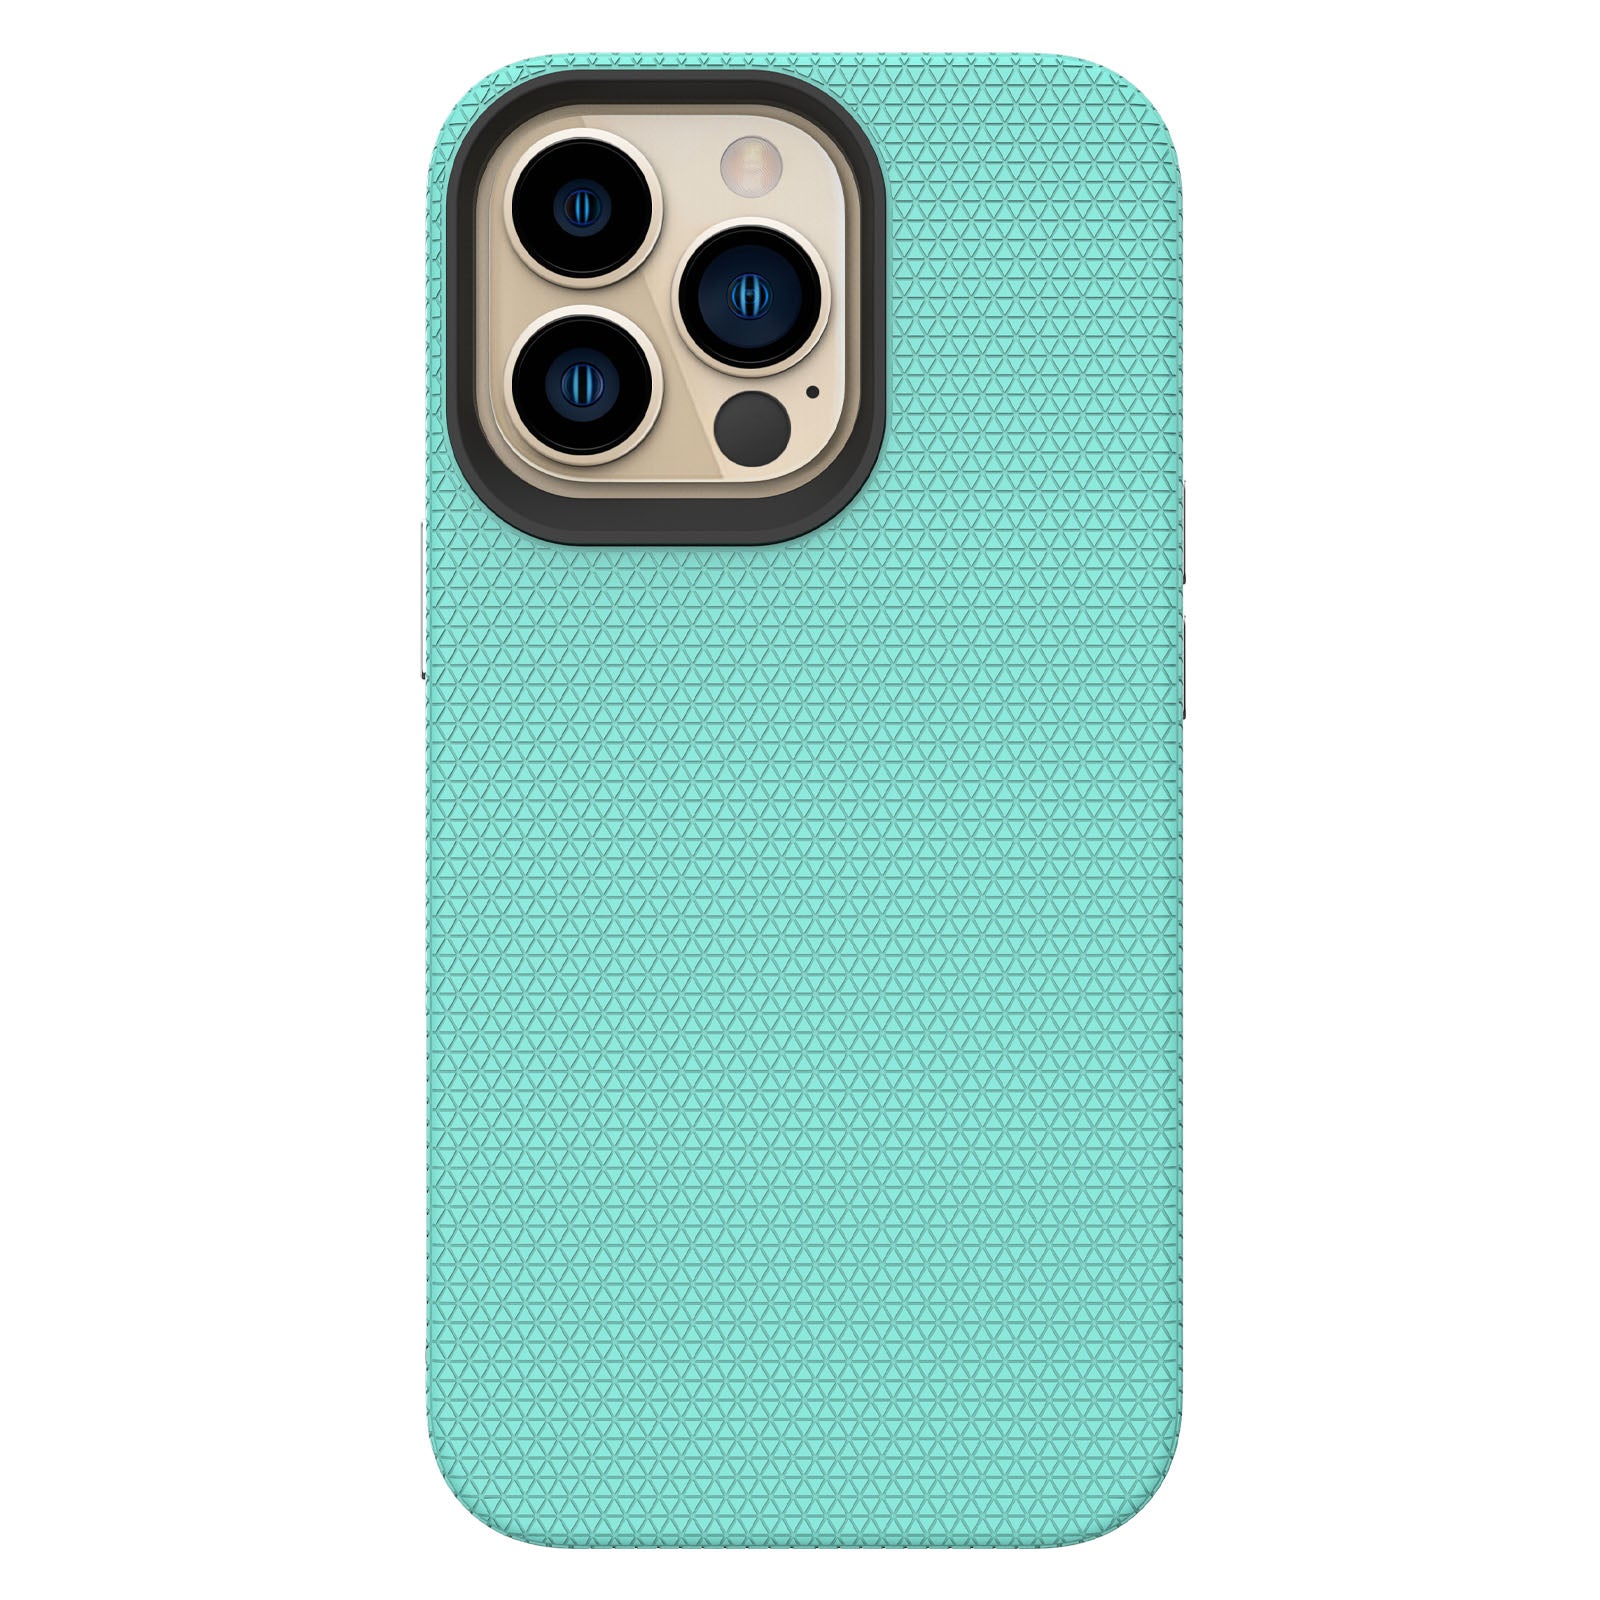 ZEOS Sphinx Dual Layer Case for iPhone 13 Pro